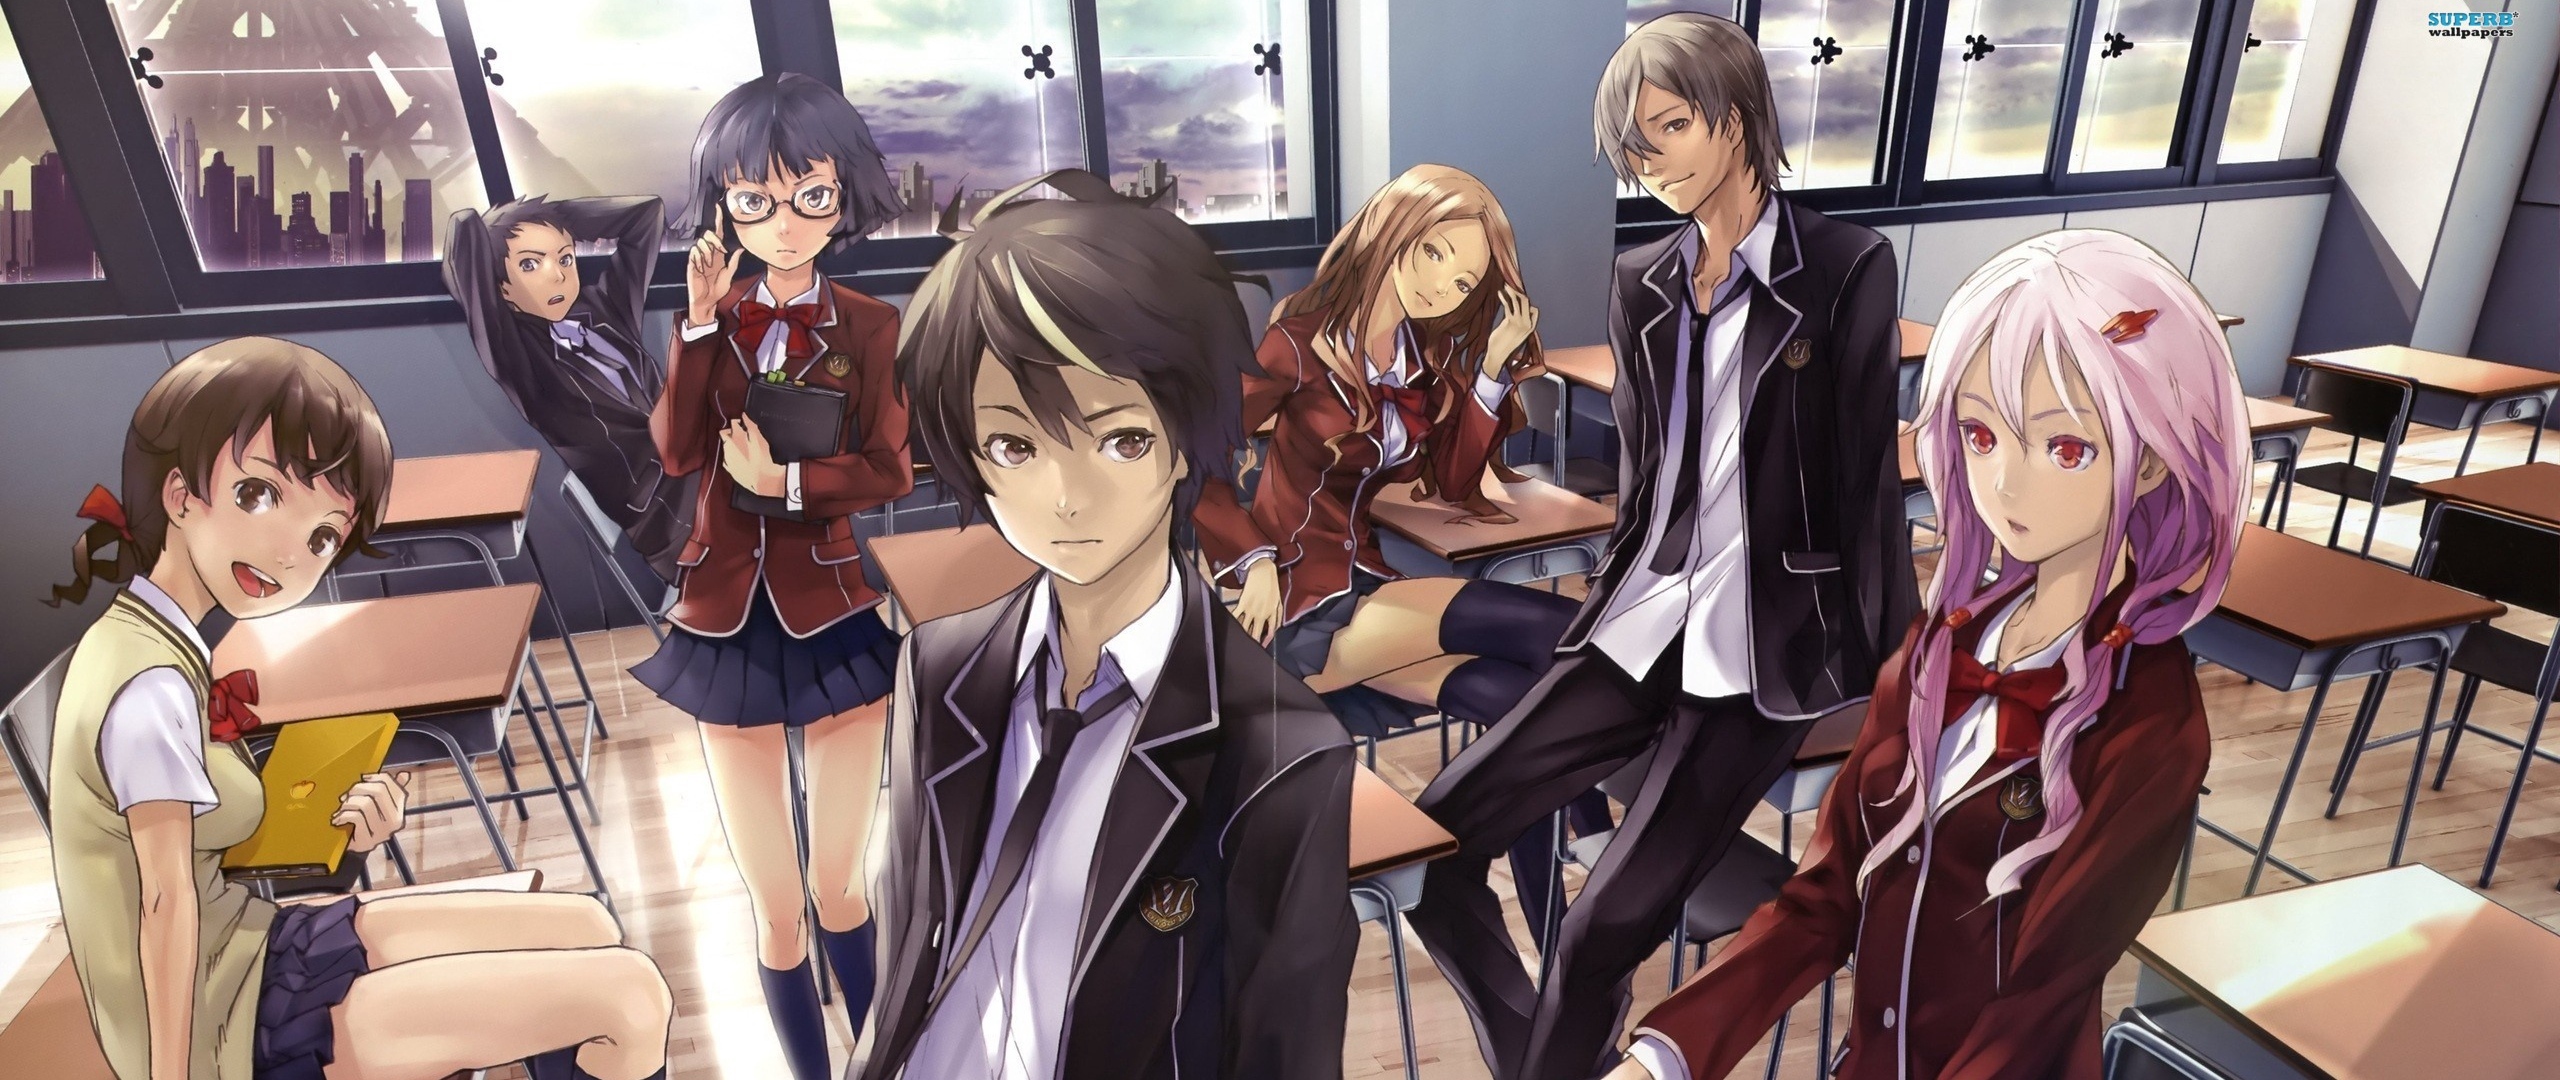 Wallpaper Anime, Guilty Crown, Students, Class, Rest , HD Wallpaper & Backgrounds